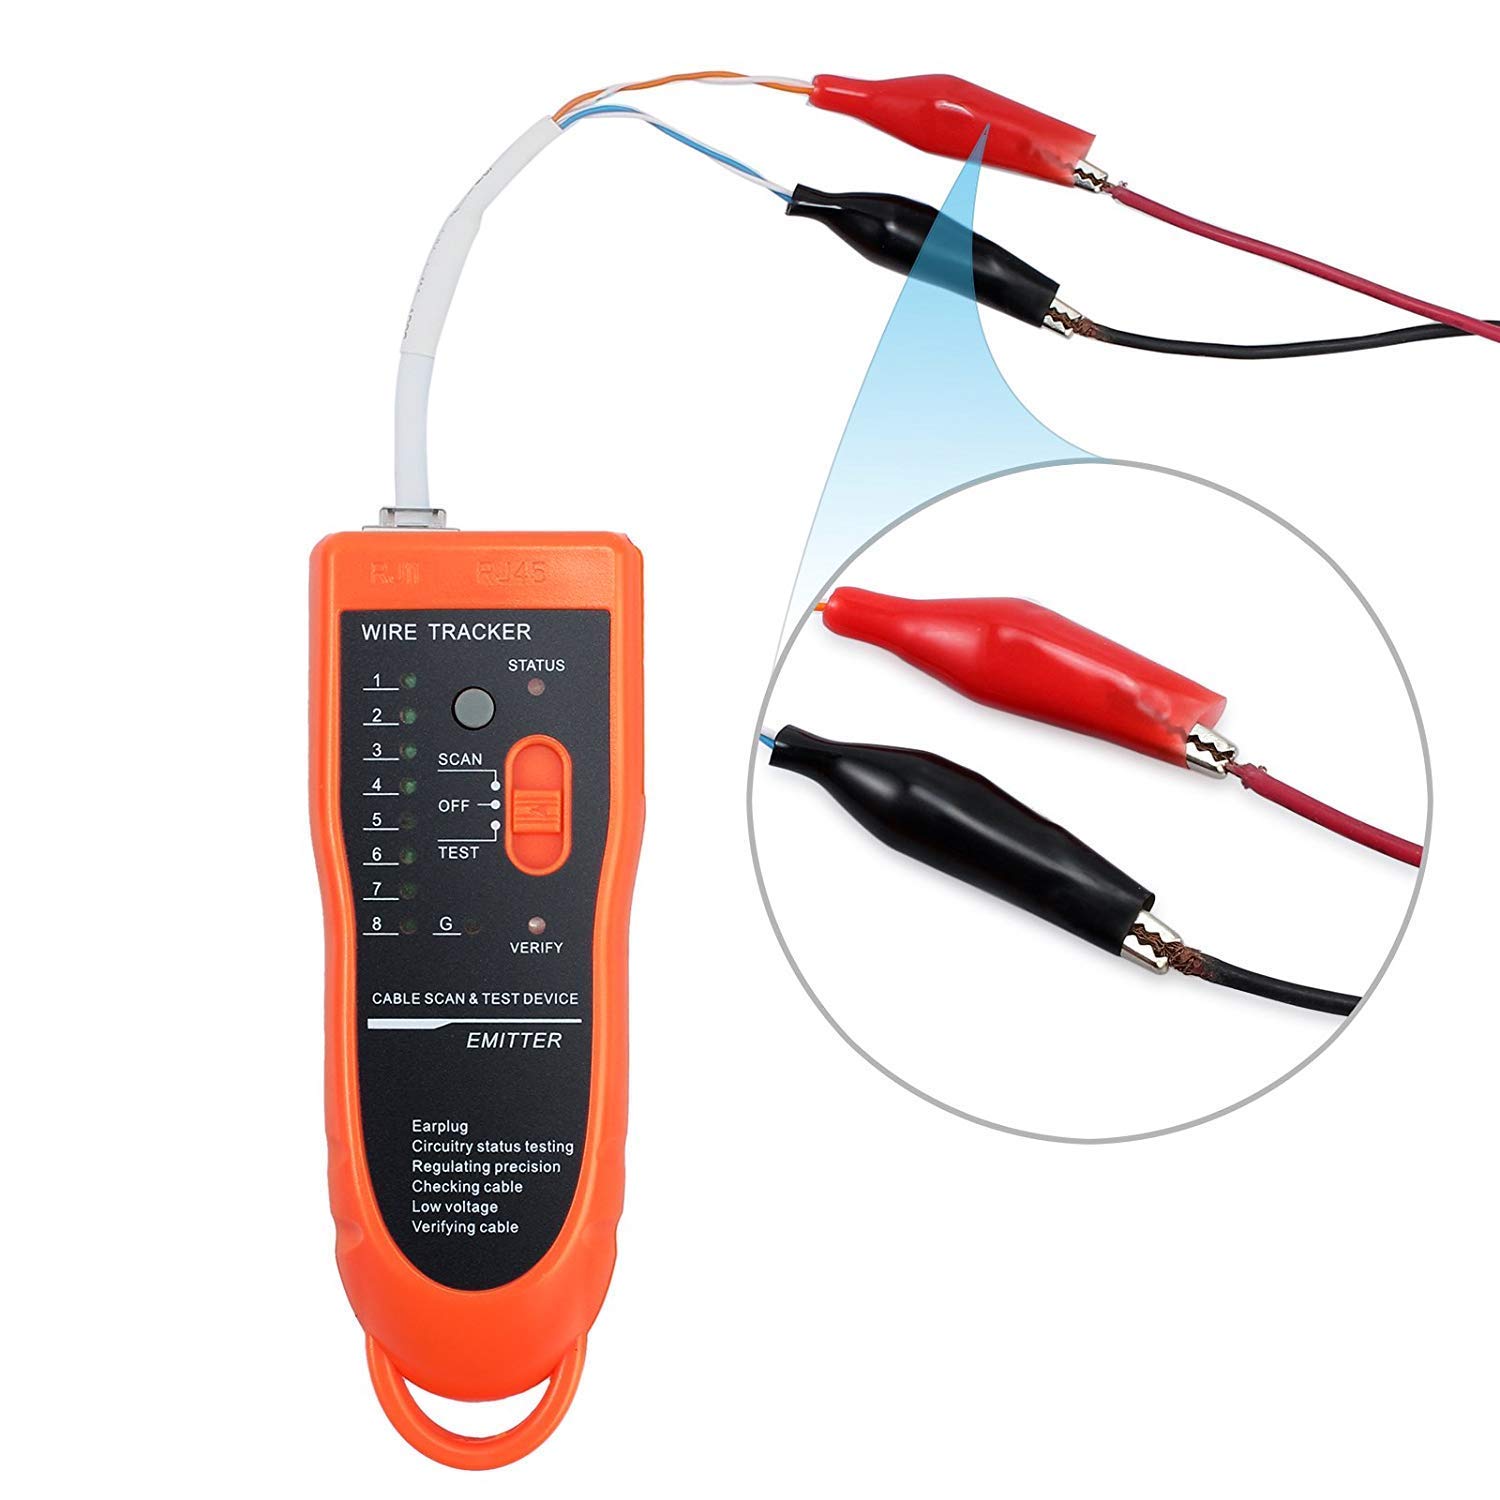 Network Cable Tester, Wire Tracker - Premium (with 9V Battery)